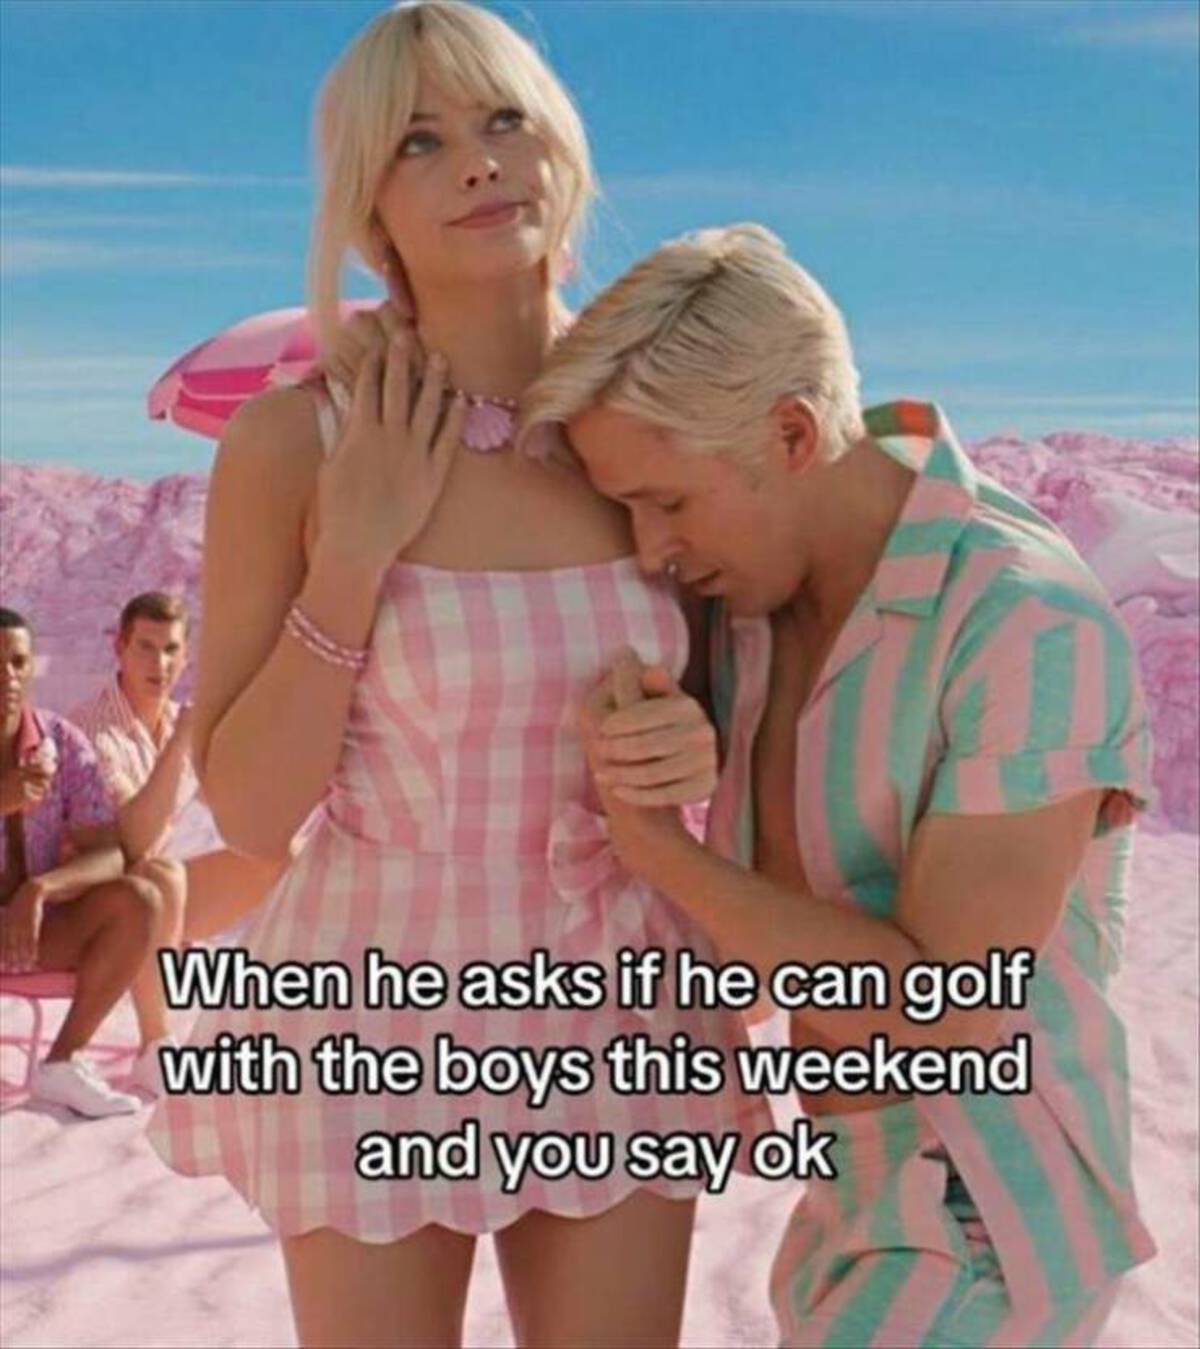 beach barbie and ken costume - When he asks if he can golf with the boys this weekend and you say ok